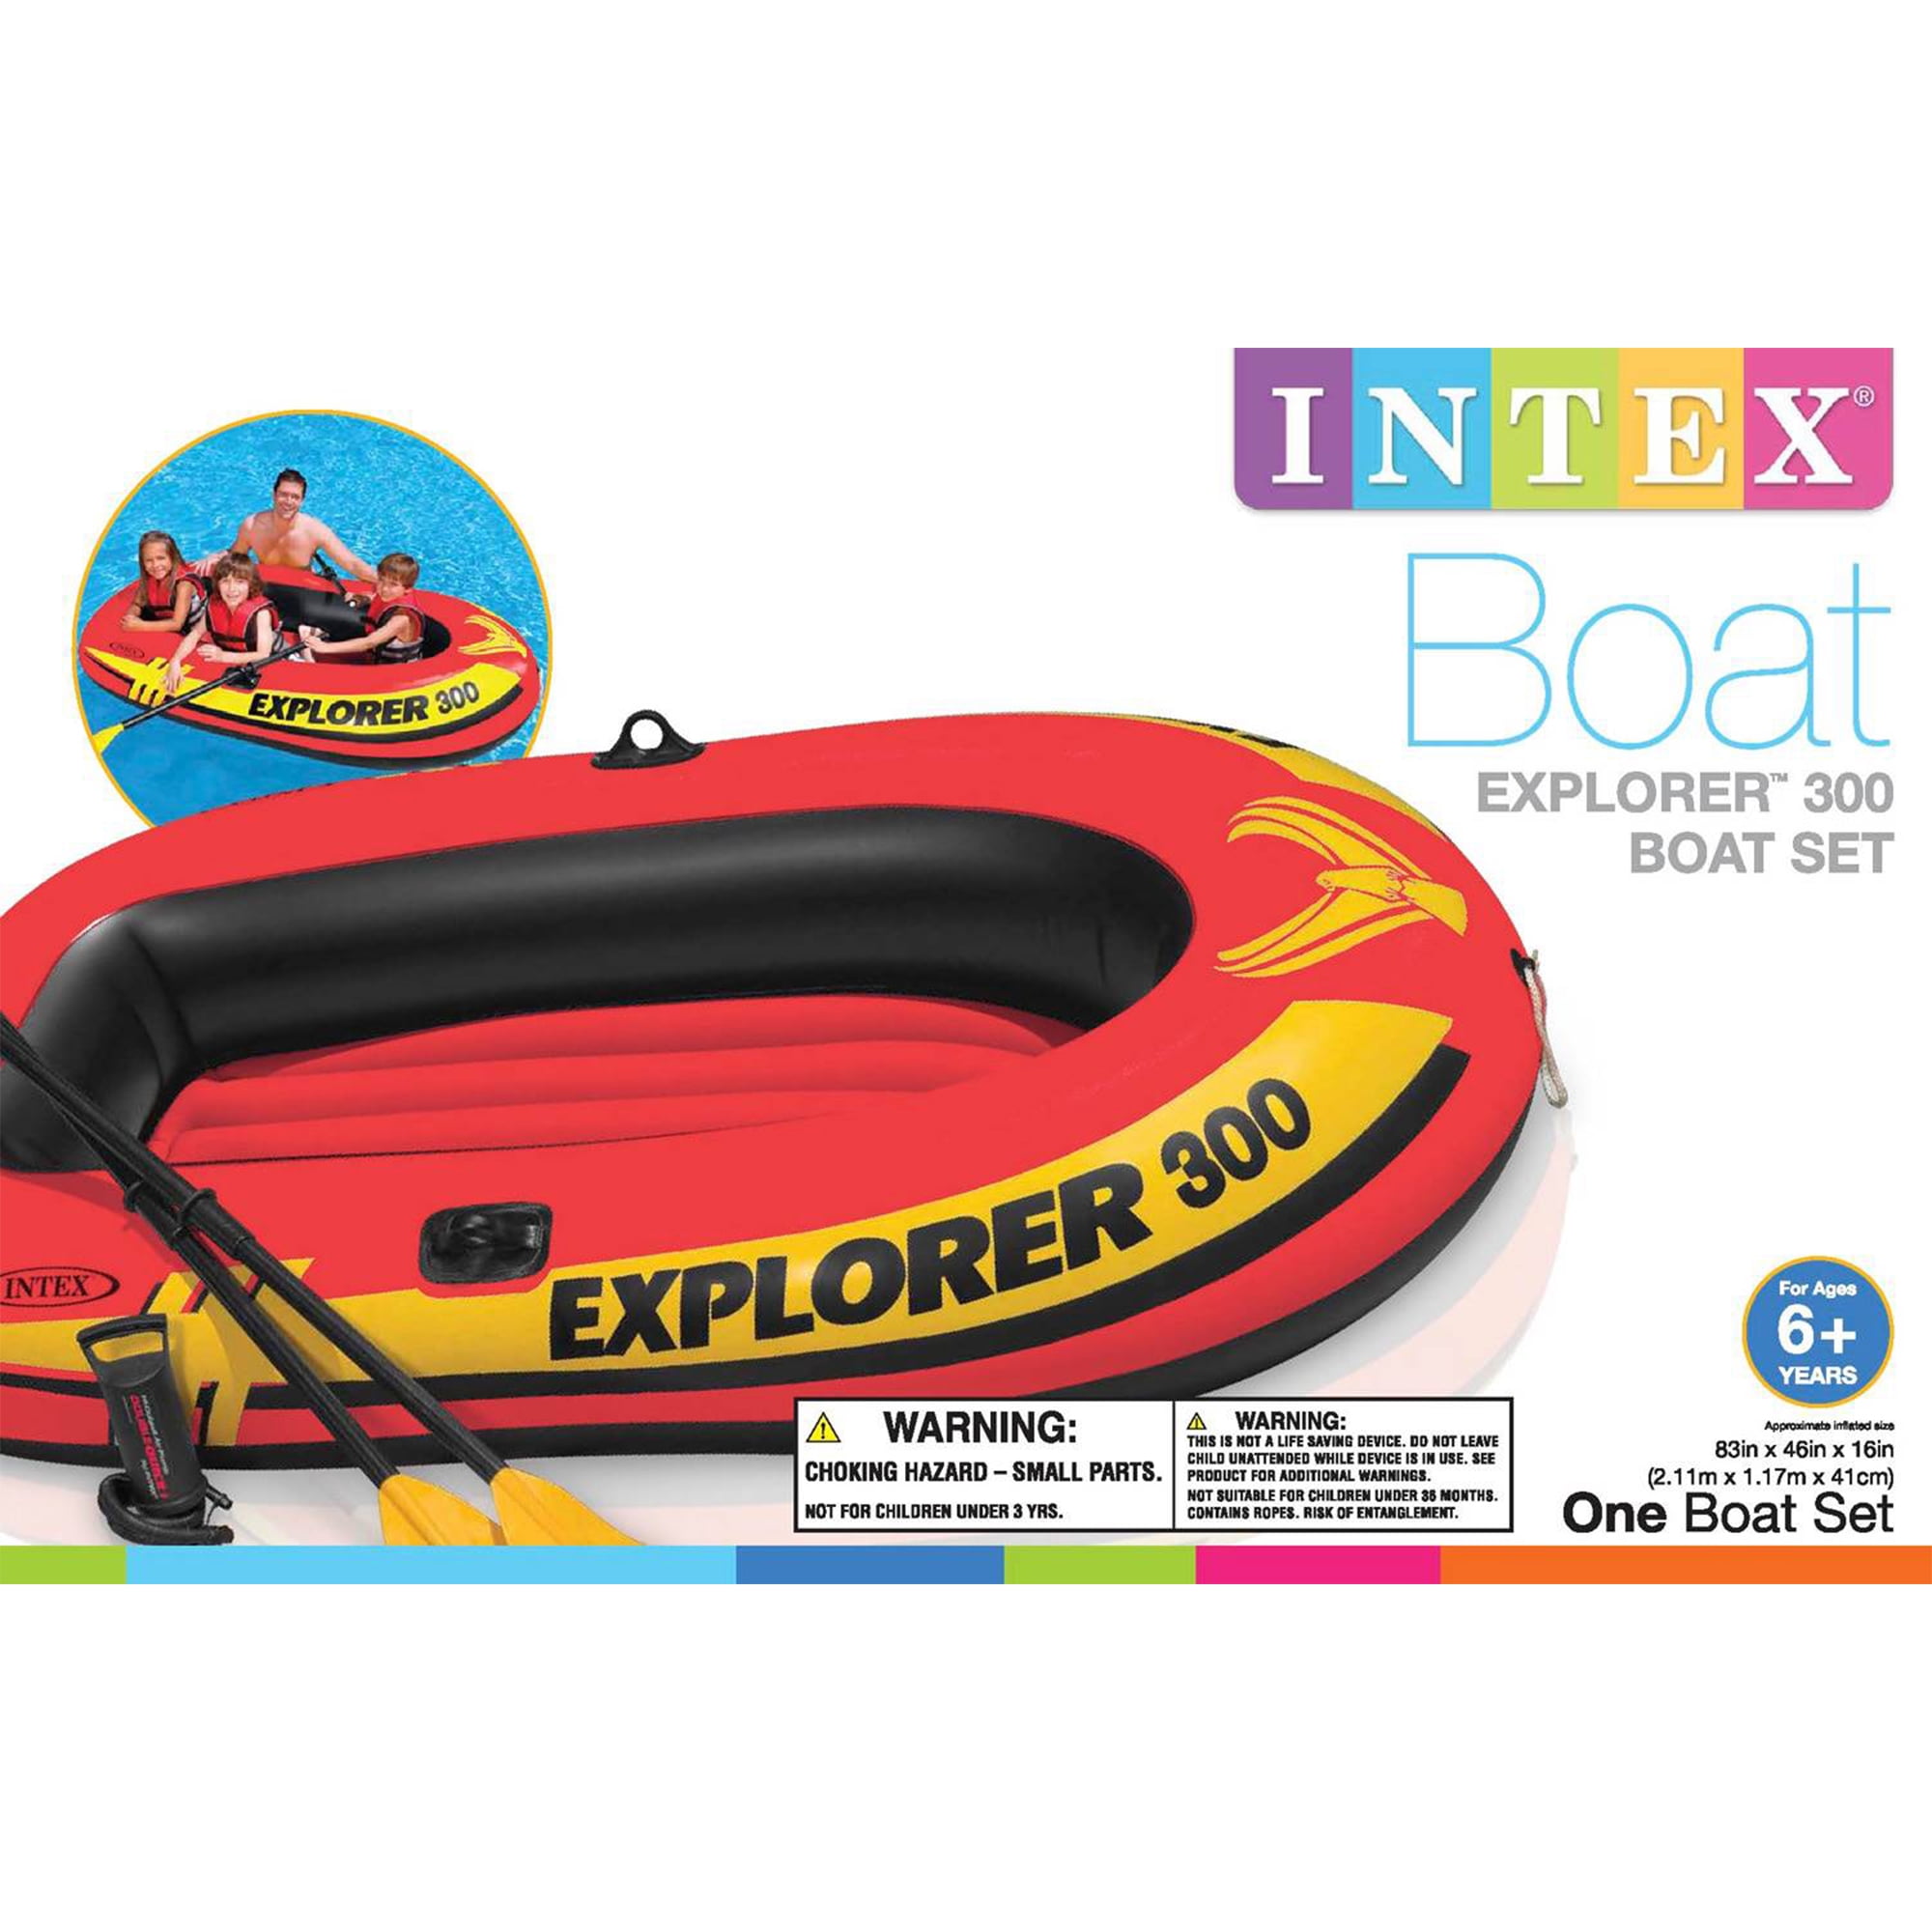 Boat 300 & Compact 3 Inflatable Fishing Explorer Raft Intex Person Oars Pump with